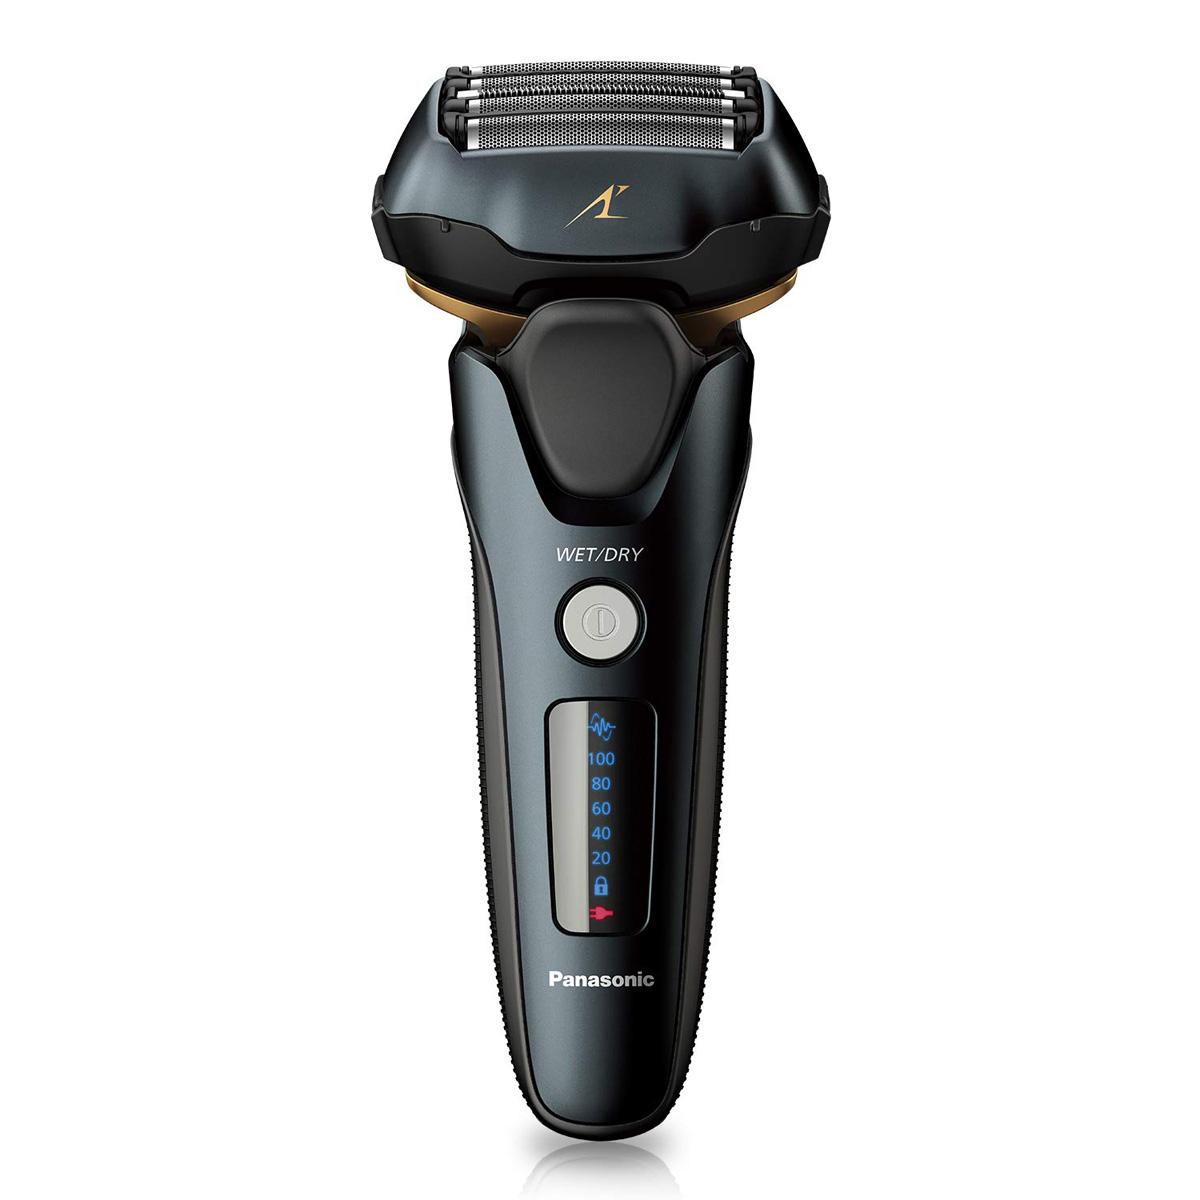 Panasonic Arc5 Wet Dry Electric Shaver for $99.99 Shipped